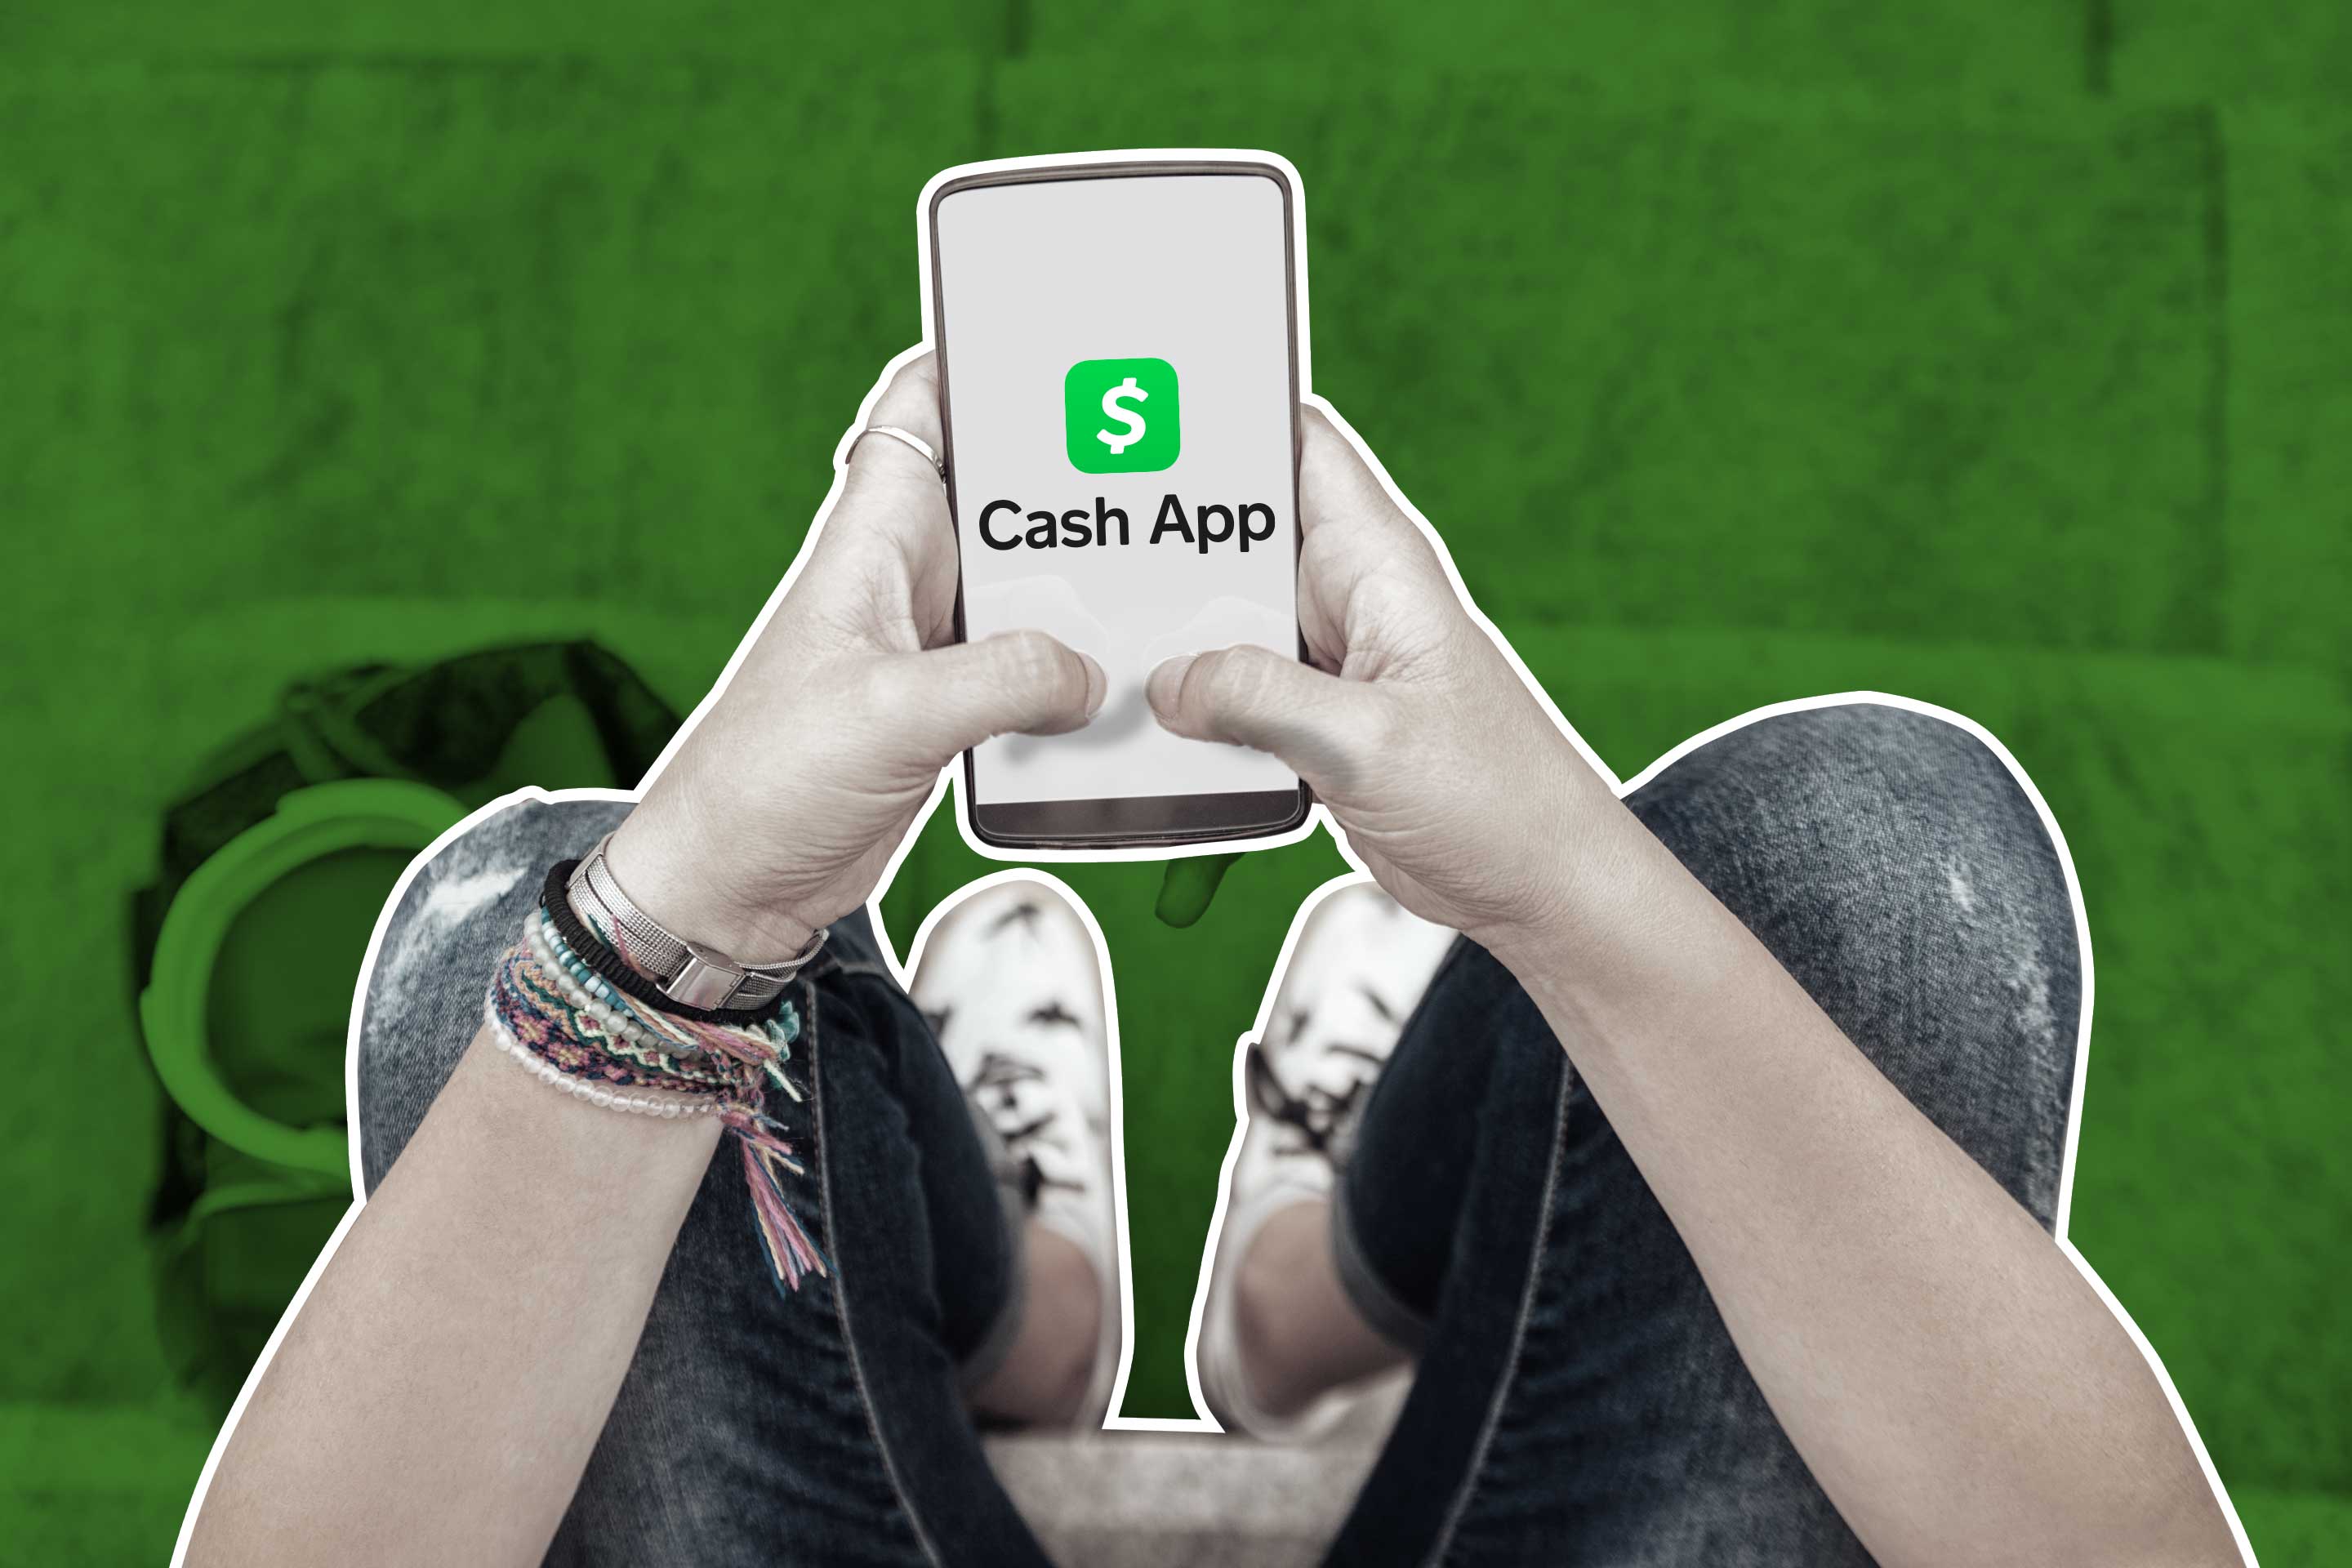 How to Order Cash App Card? How to Get Cash App Card? 